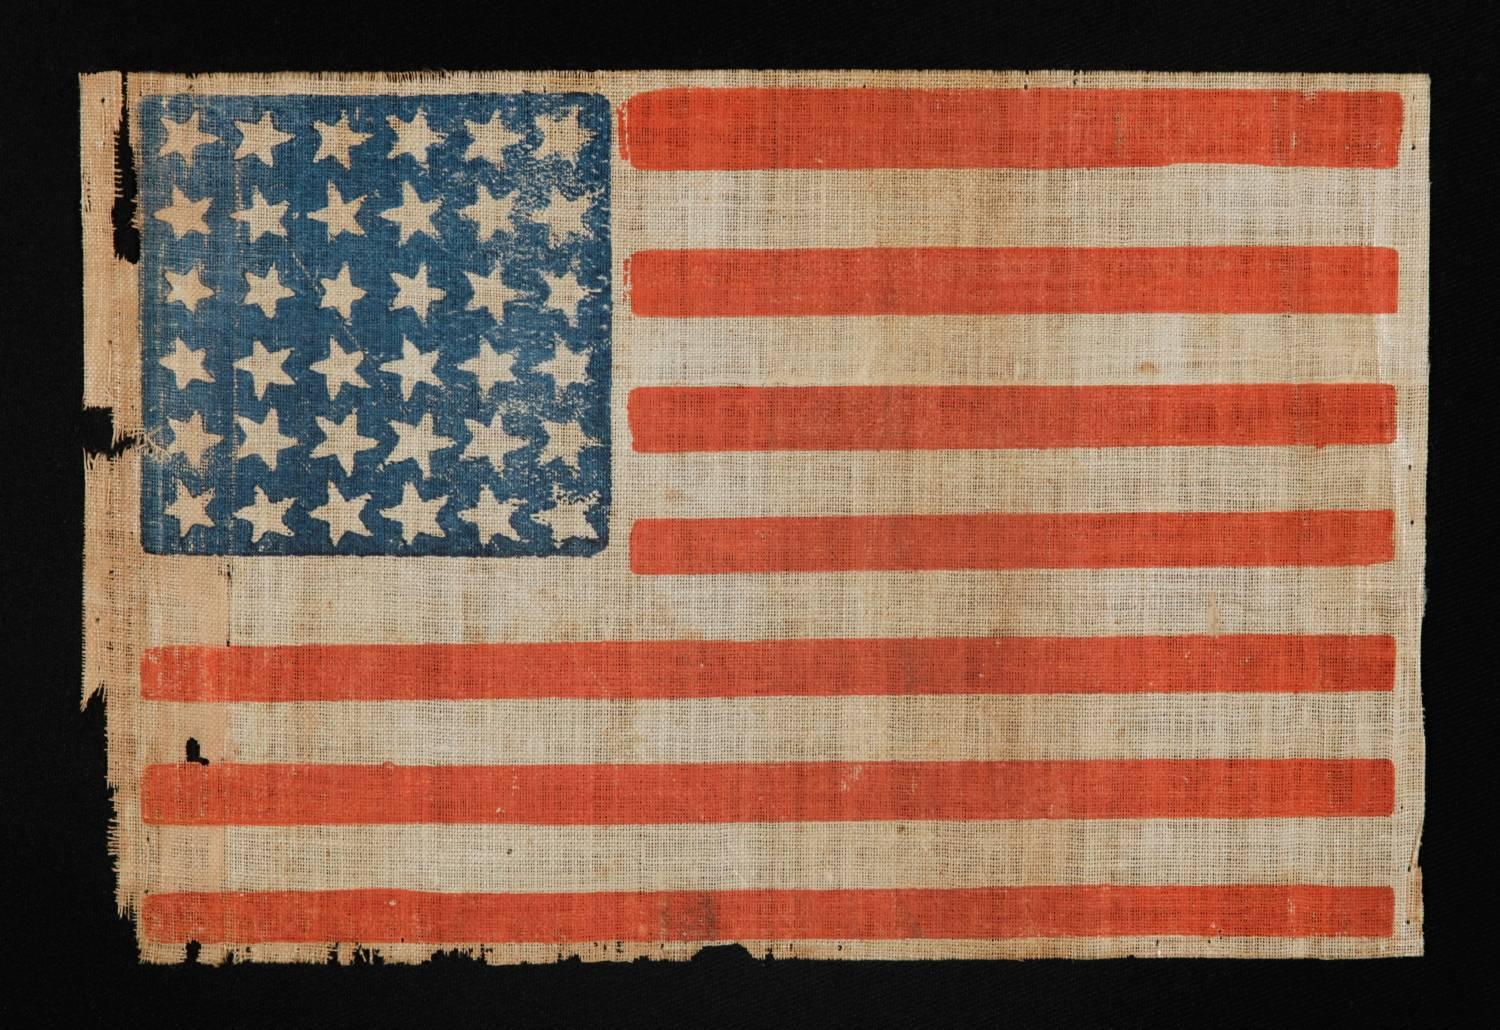 CIVIL WAR ERA ANTIQUE AMERICAN PARADE FLAG WITH 36 STARS IN DANCING ROWS, 1864-1867, REFLECTS NEVADA'S ADDITION AS THE 36TH STATE:

36 Star, Civil War era (1864-67) American parade flag, printed on coarse, glazed cotton. The stars are arranged in 6